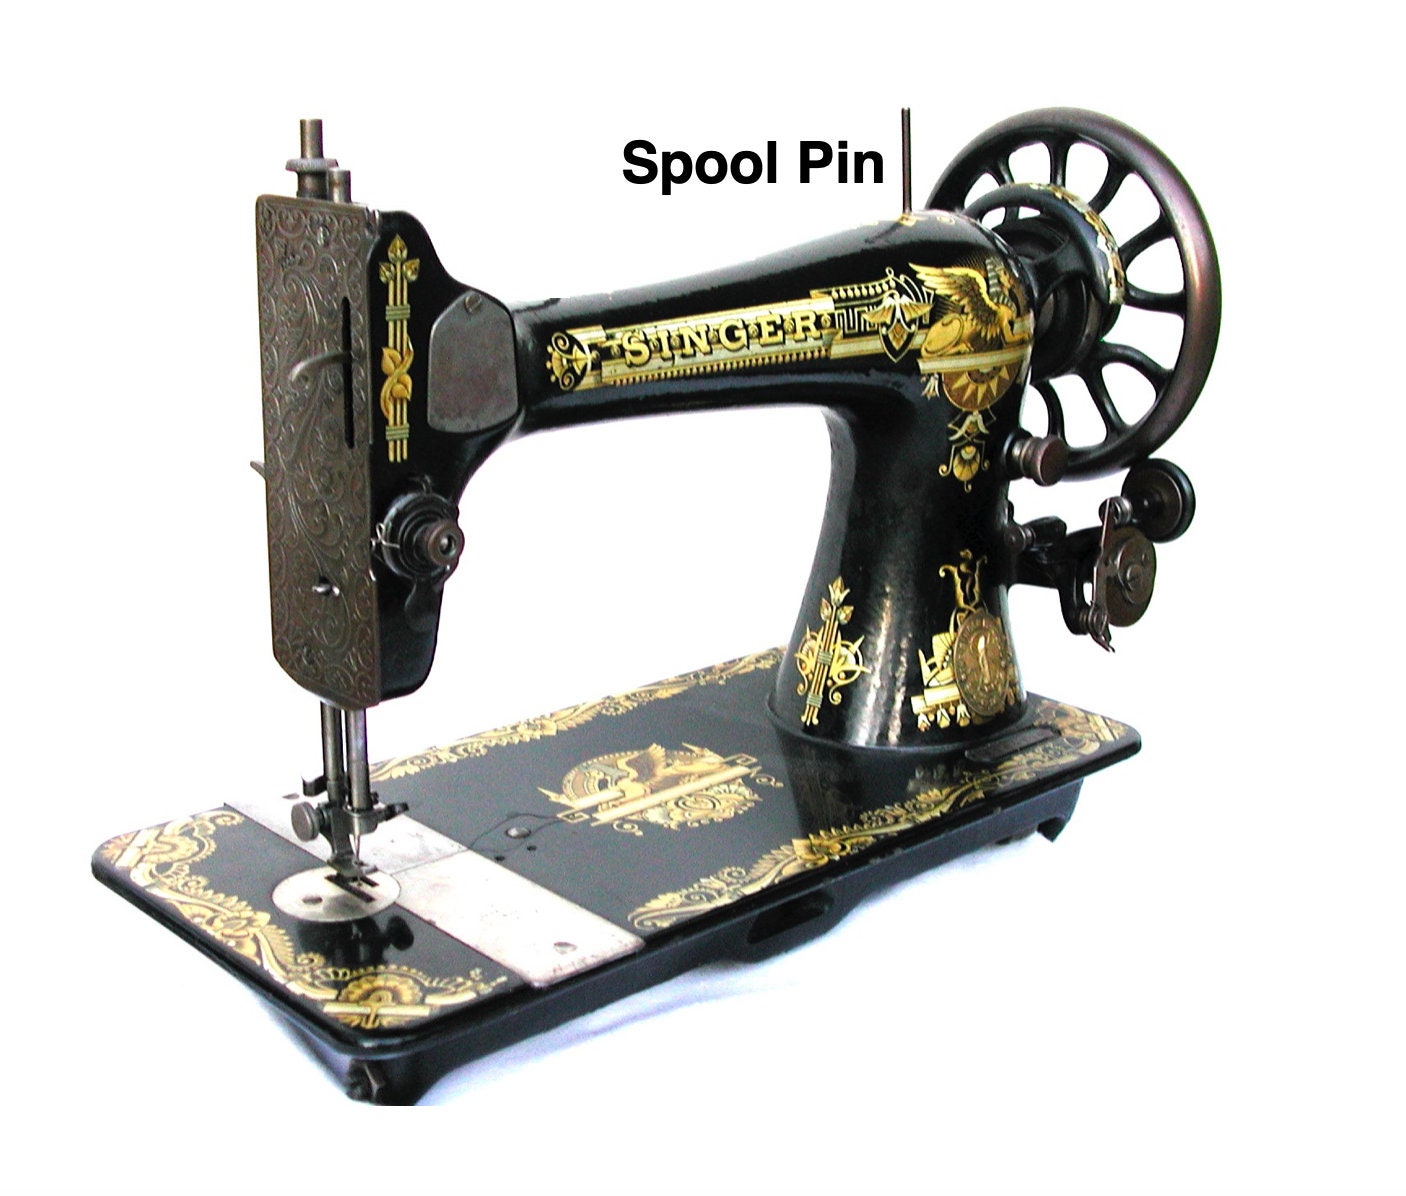 Thread Spool Pin for Vintage Sewing Machines 